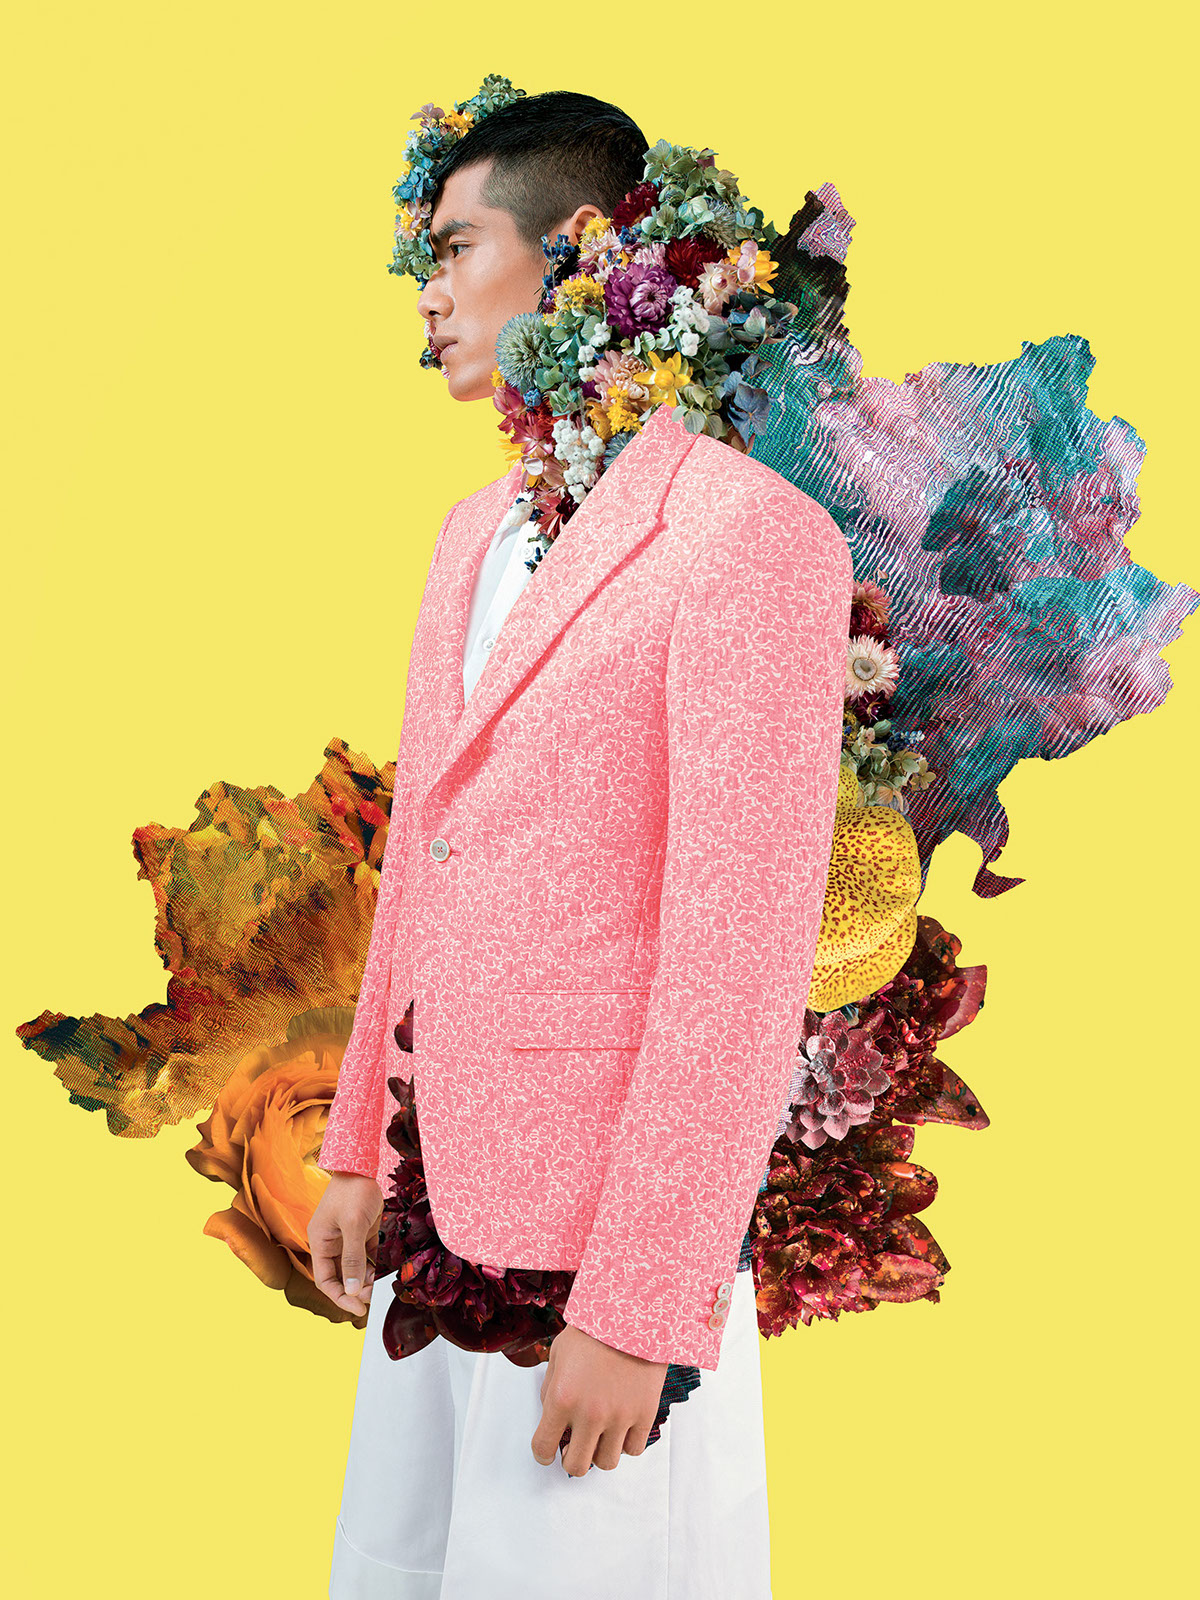 collage Creative collage Digital Collage lane crawford Advertising Campaign campaign ad campaign floral flower